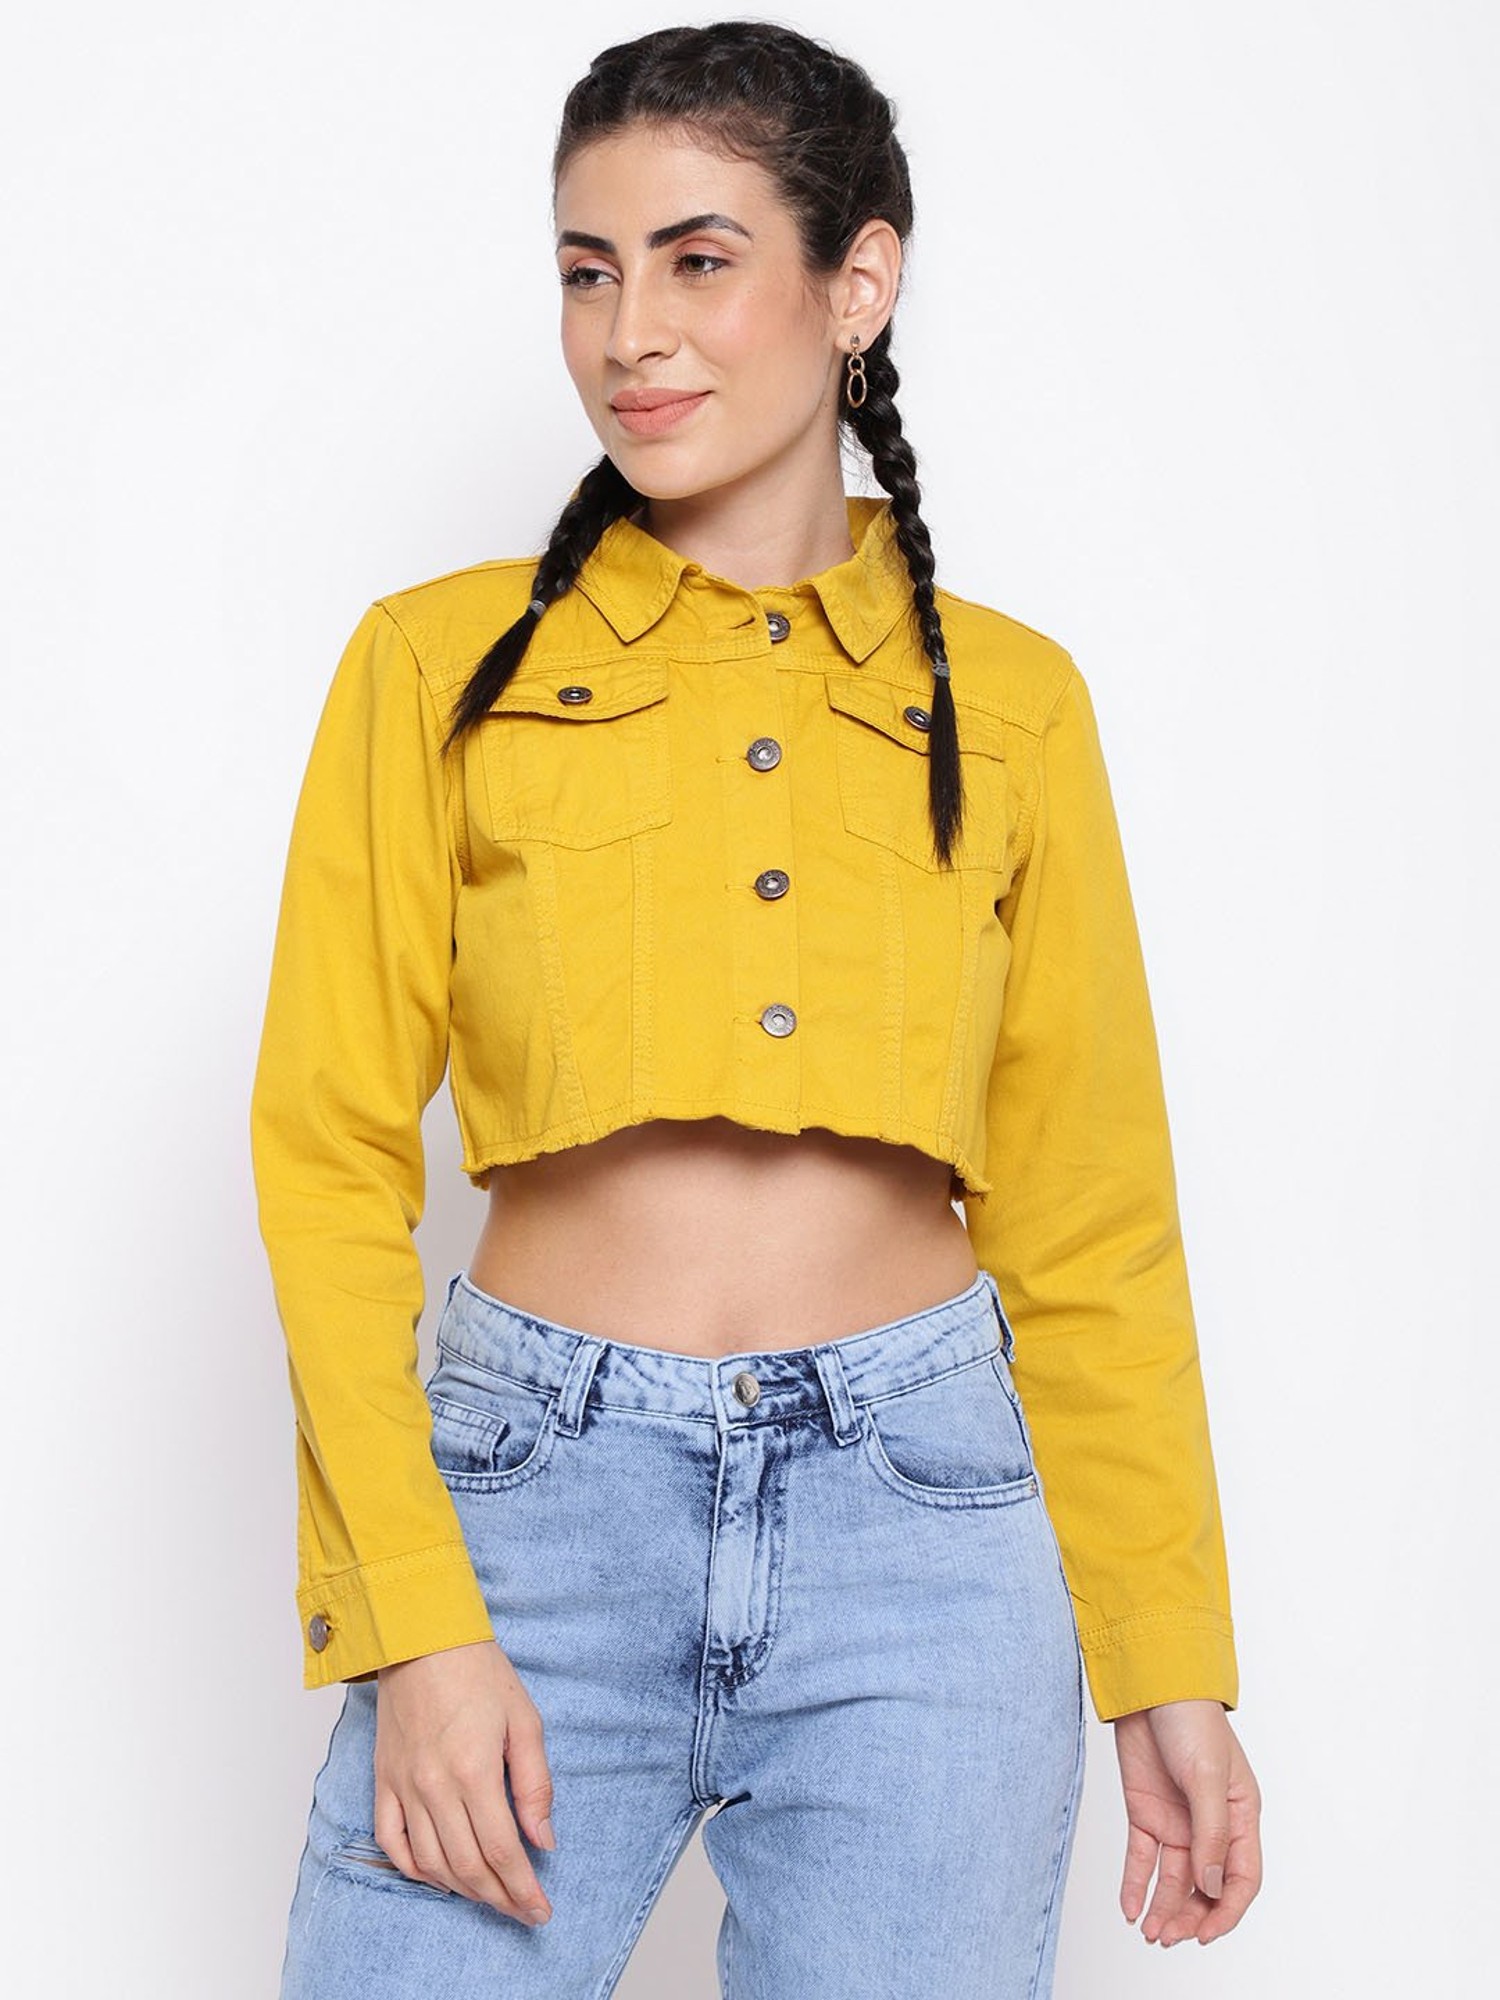 A yellow denim jacket is definitely one way to brighten up a dull Sunday | Yellow  jacket outfit, Jacket outfit women, Yellow denim